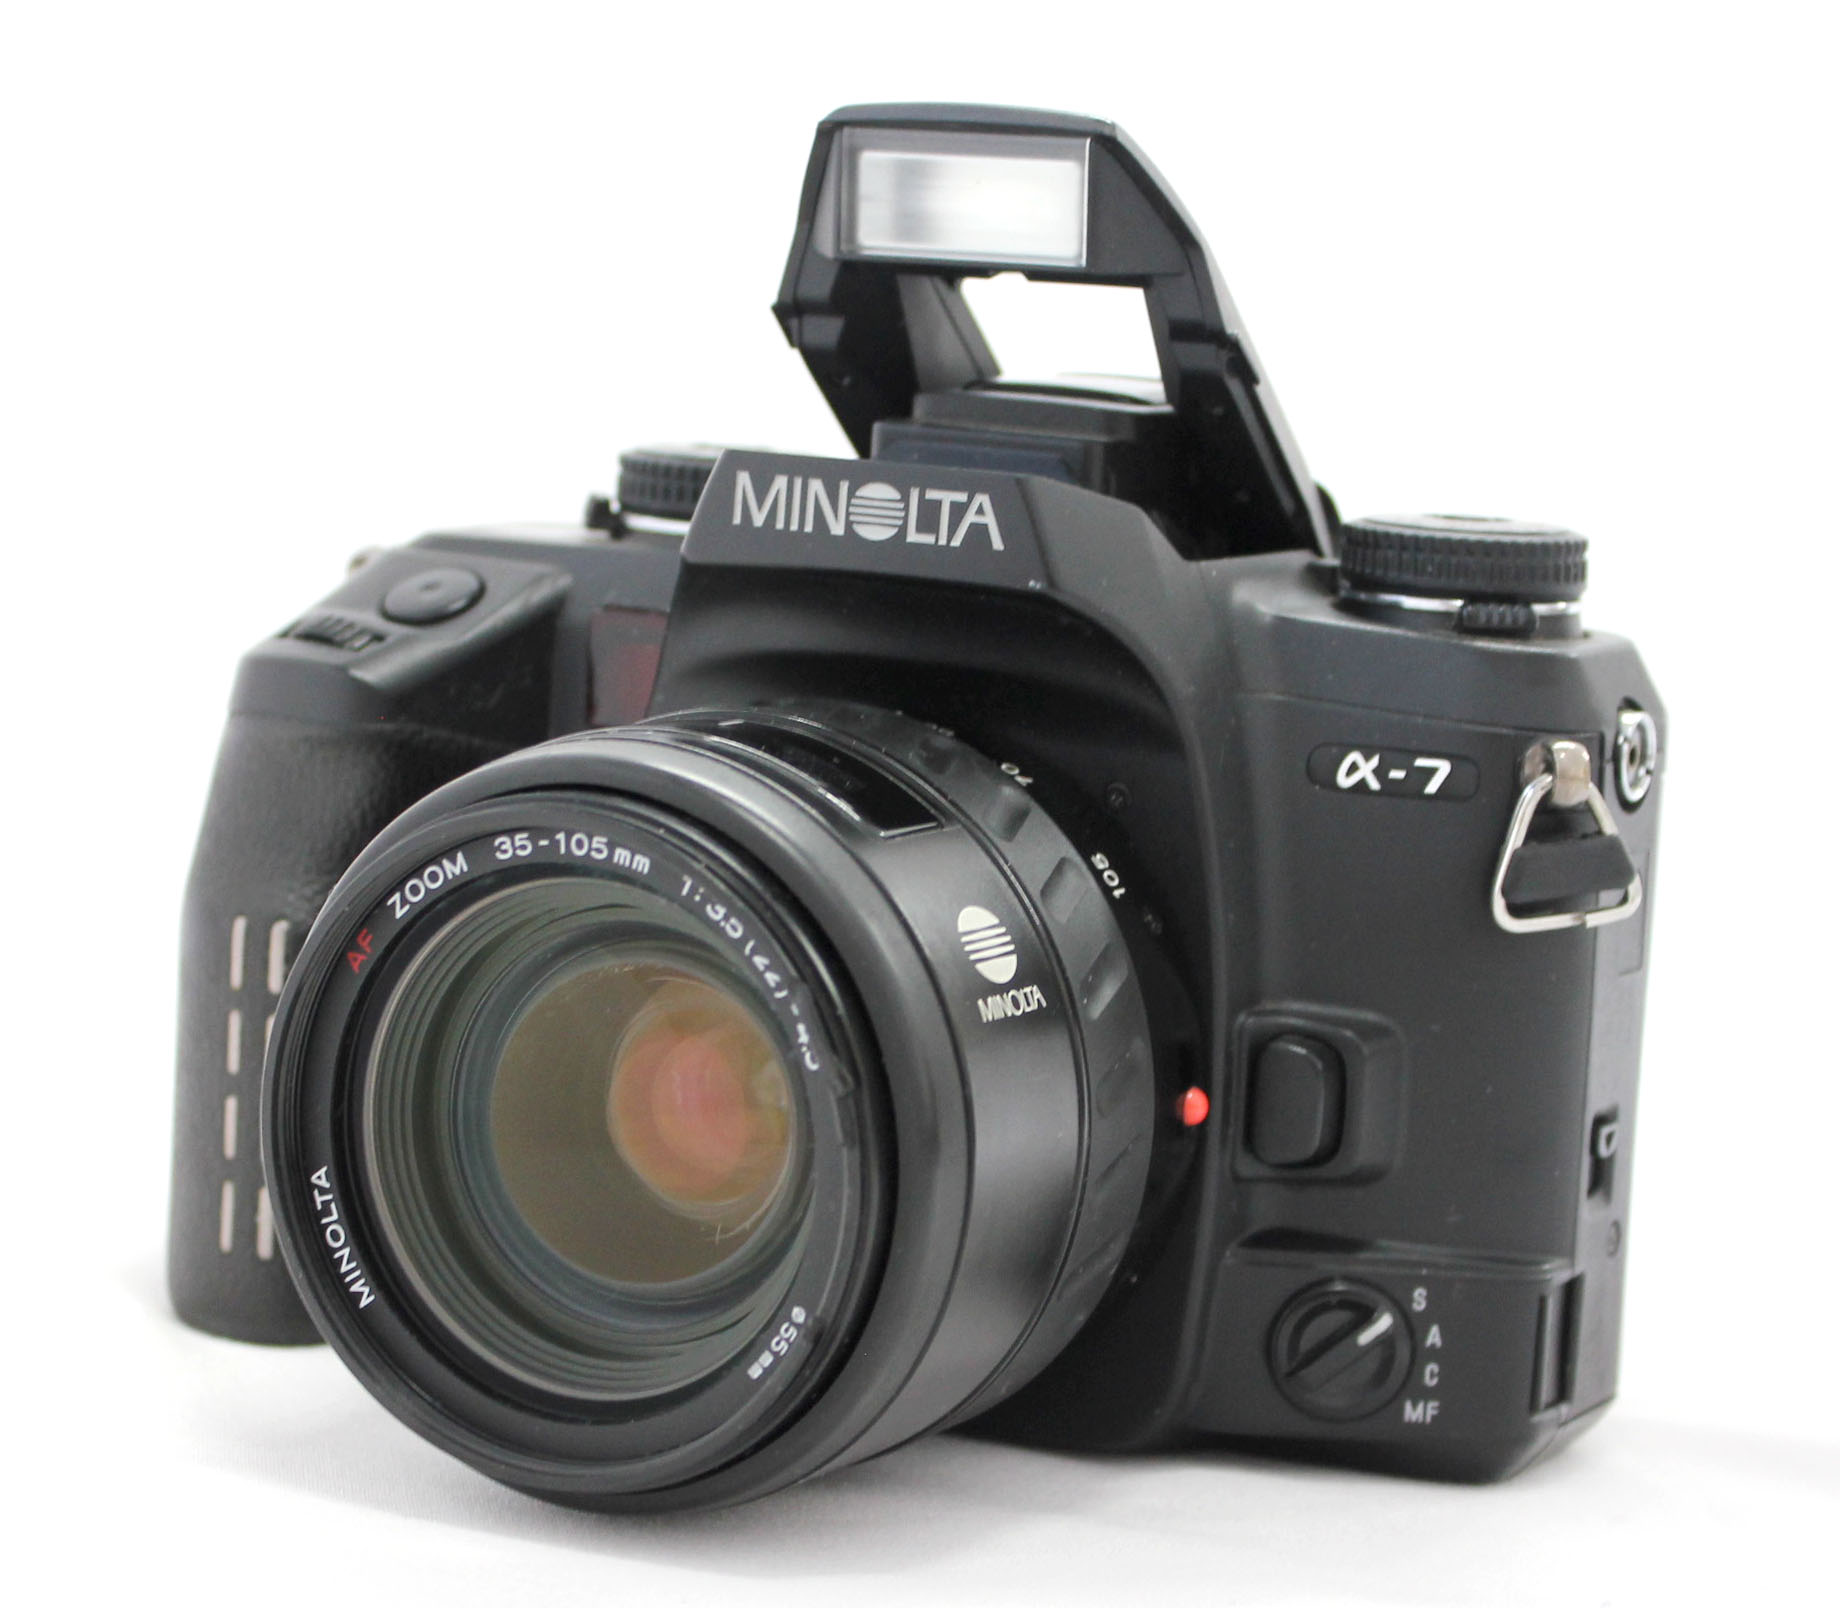 [Excellent++++] Minolta Maxxum 7 Dynax 7 a7 with AF Zoom 35-105mm F/3.5-4.5 from Japan